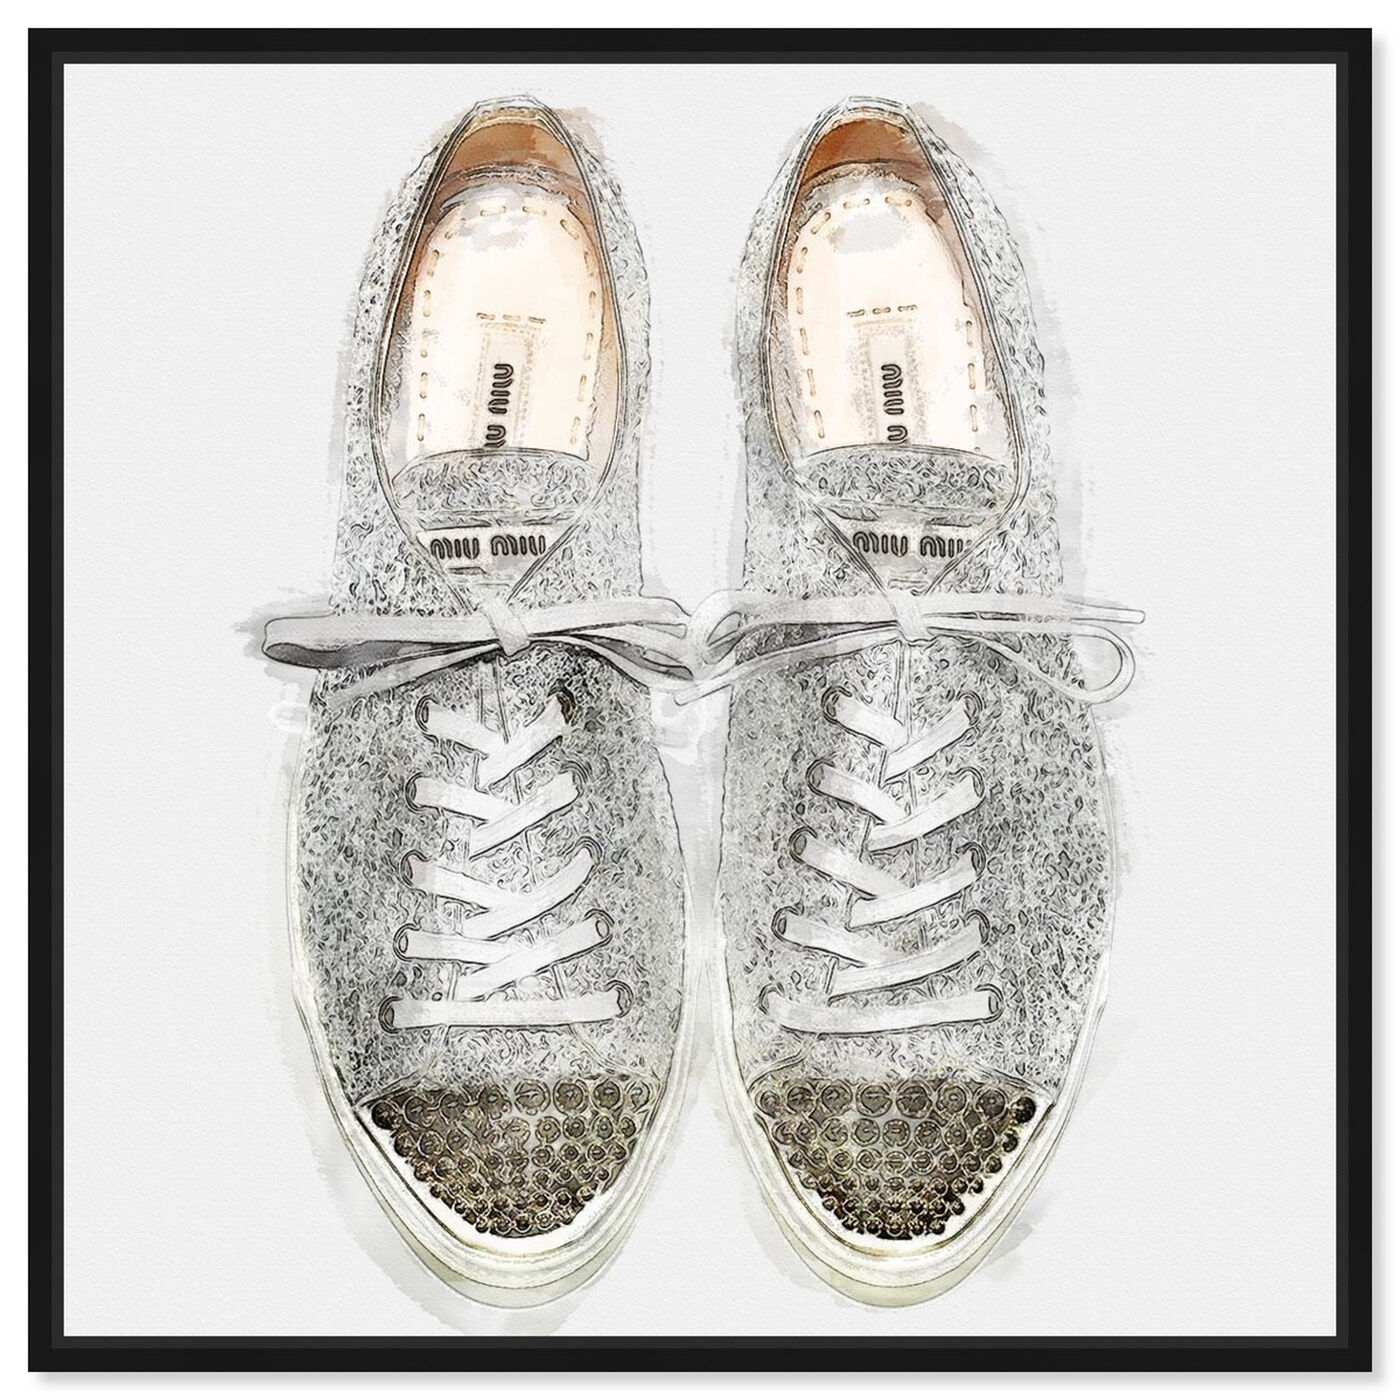 Oliver Gal Fashion and Glam Wall Art Framed Canvas Prints 'Glitter Sneakers' Shoes - Gray, Gray - 40 x 40 - Black